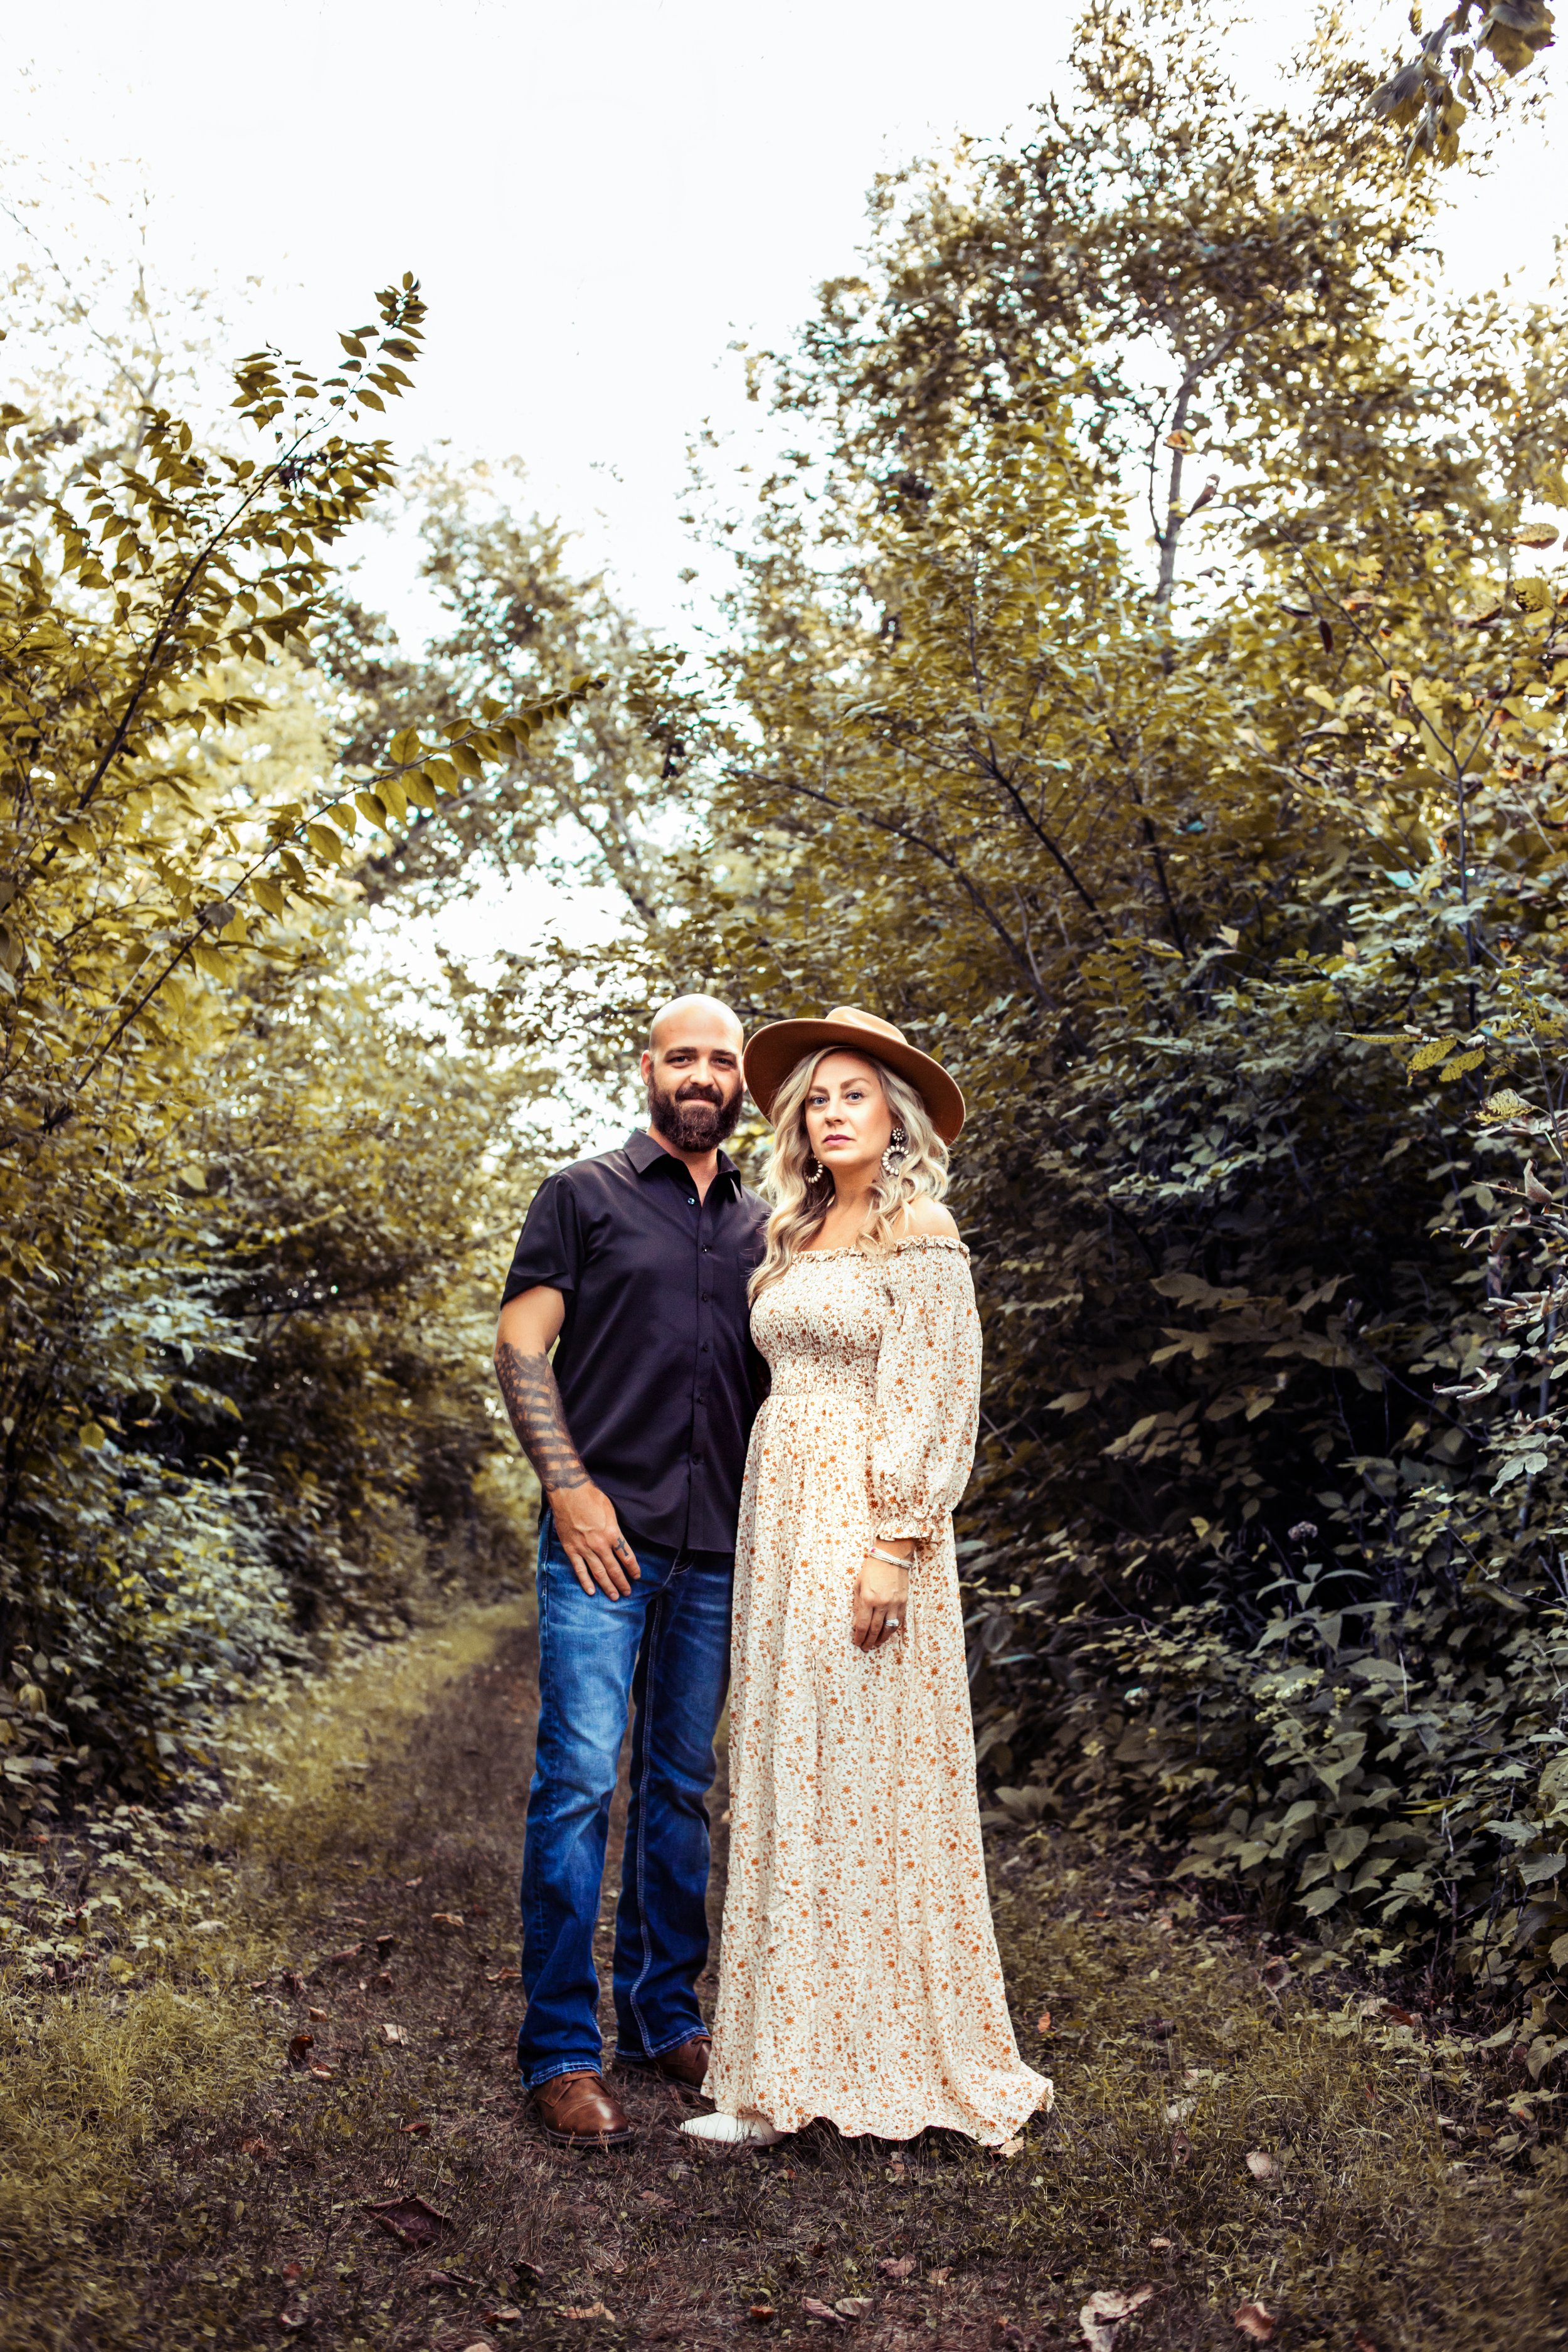  Husband and wife wearing boho vibe outfits in a garden path taken by Teala Ward Photography. boho outfit ideas fam pics #TealaWardPhotography #IllinoisValleyPhotographer #midwestphotography #TealaWardFamilies #Illinoisfamilypictures 